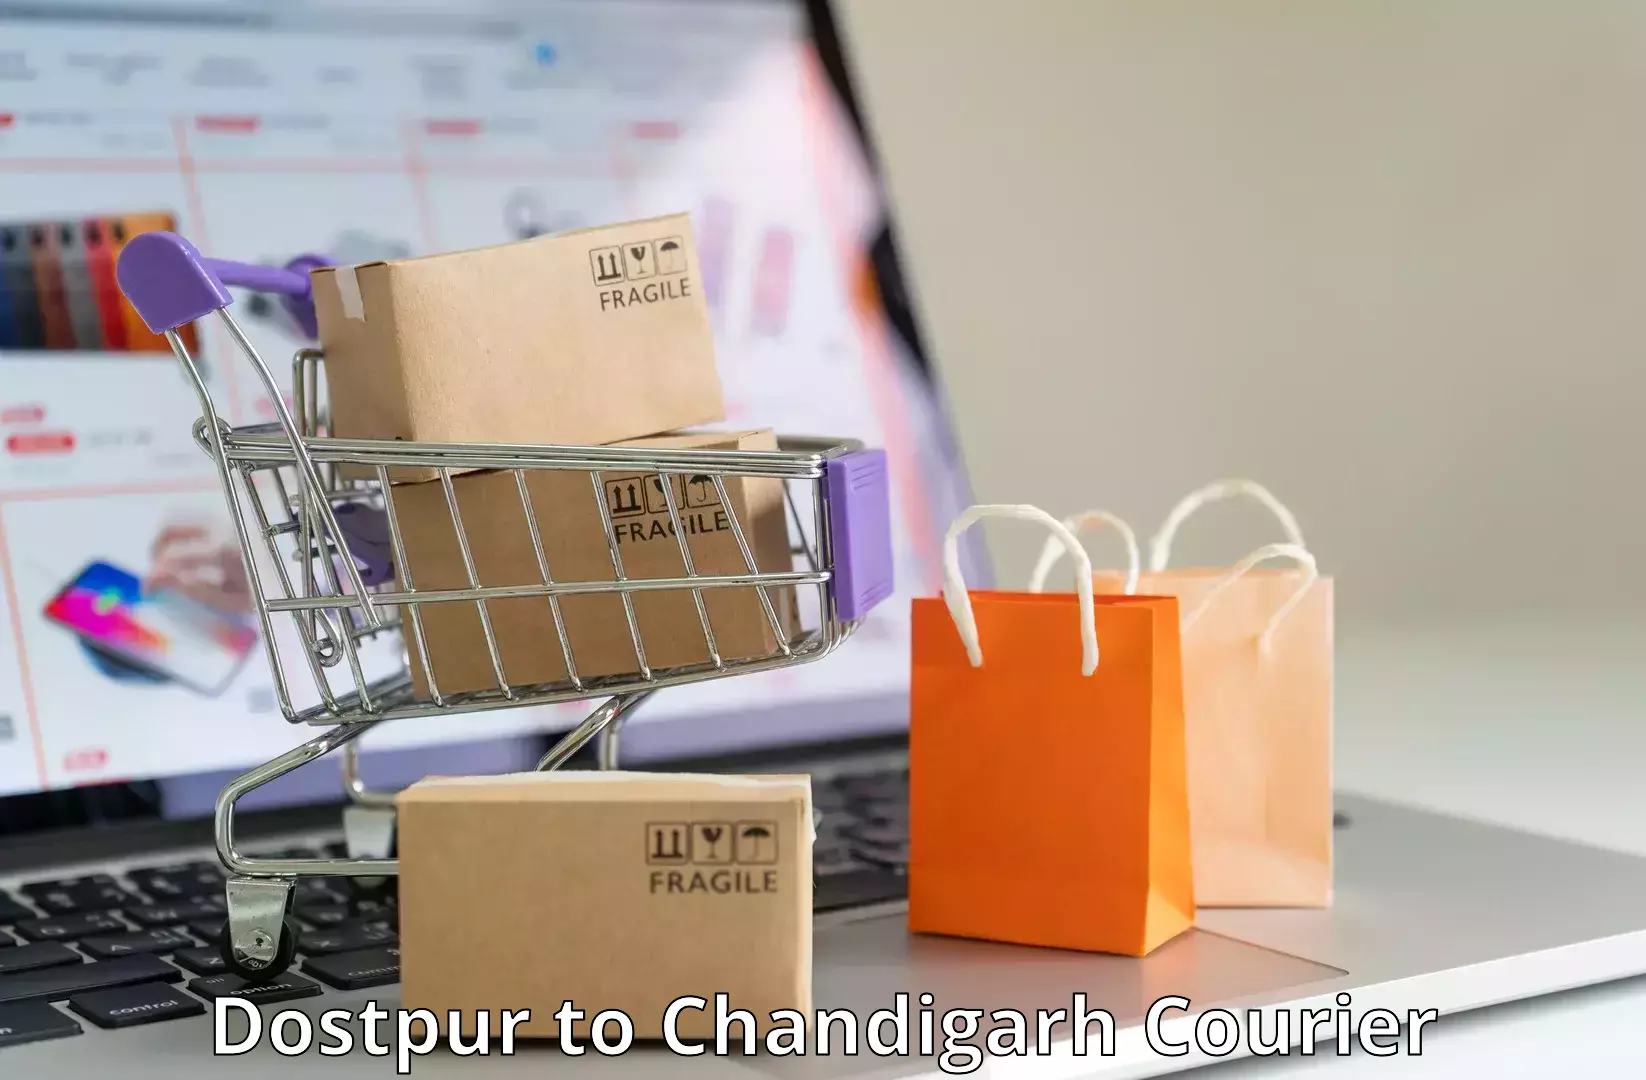 Personal courier services Dostpur to Chandigarh